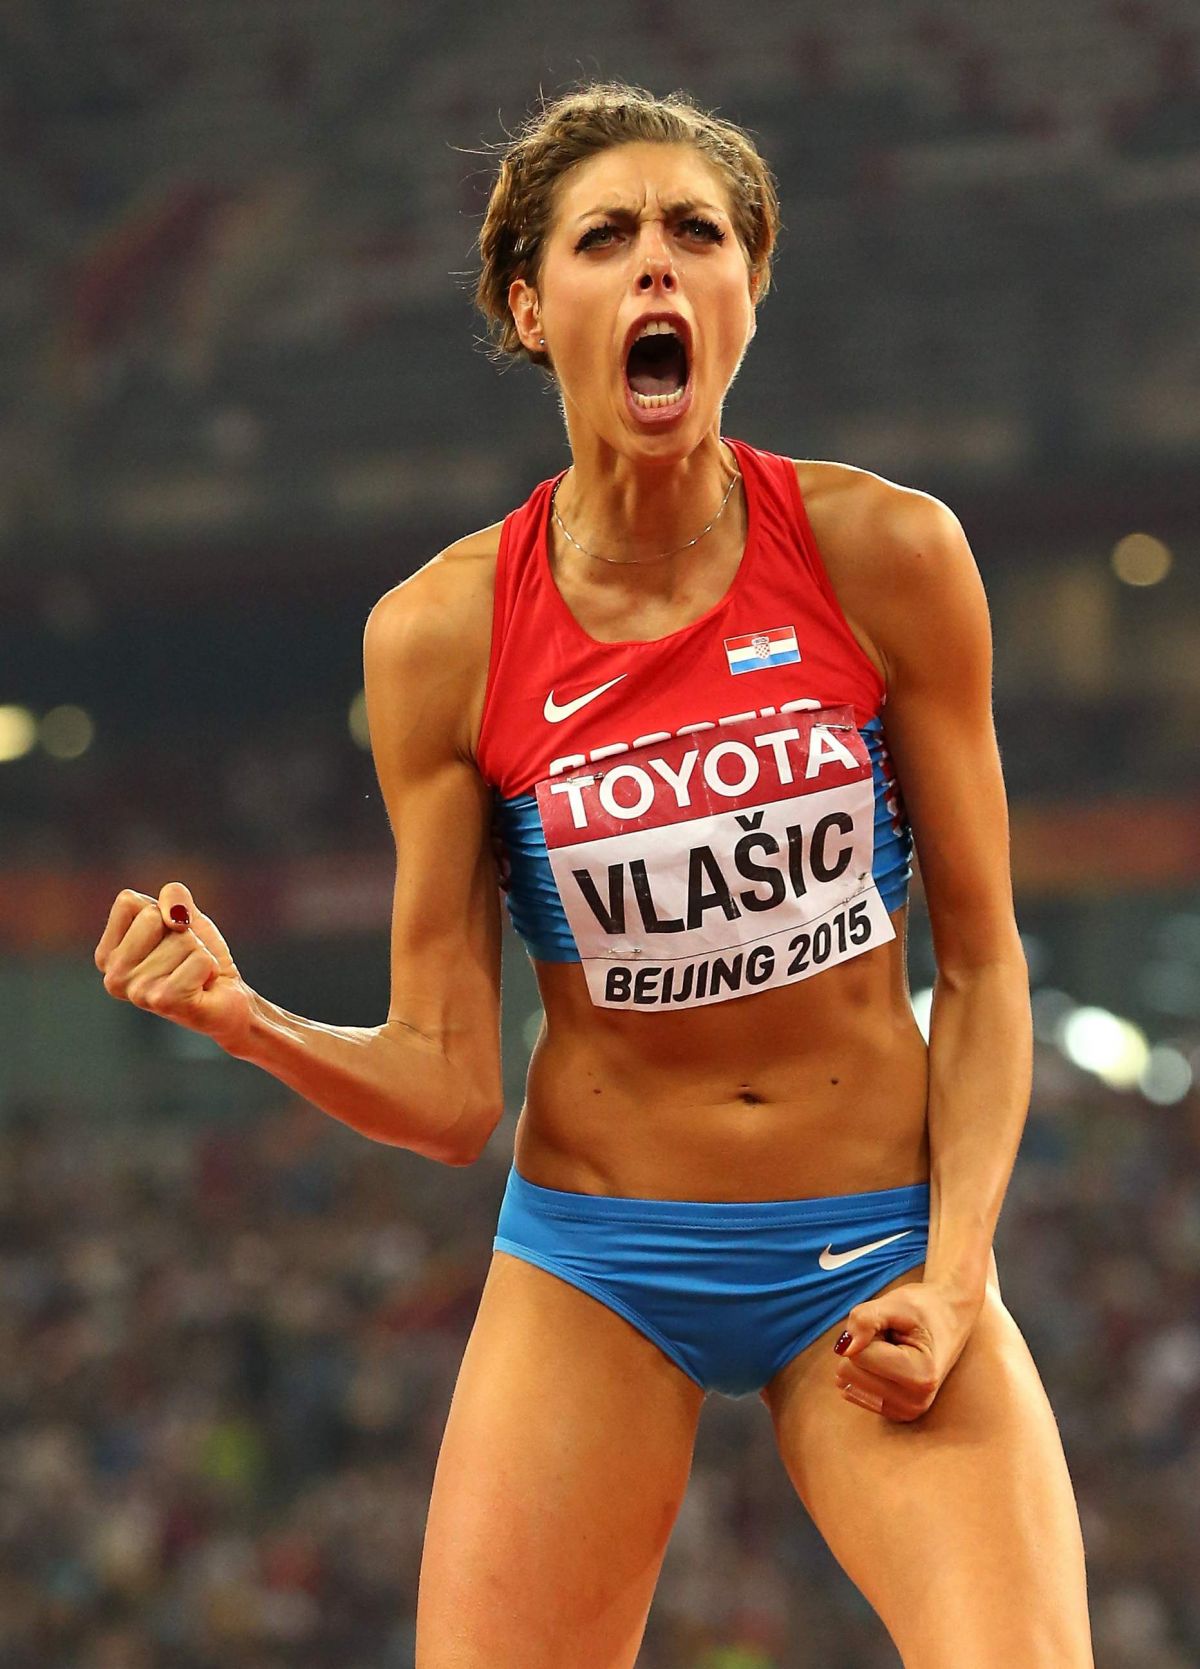 BLANKA VLASIC Competes in the Women